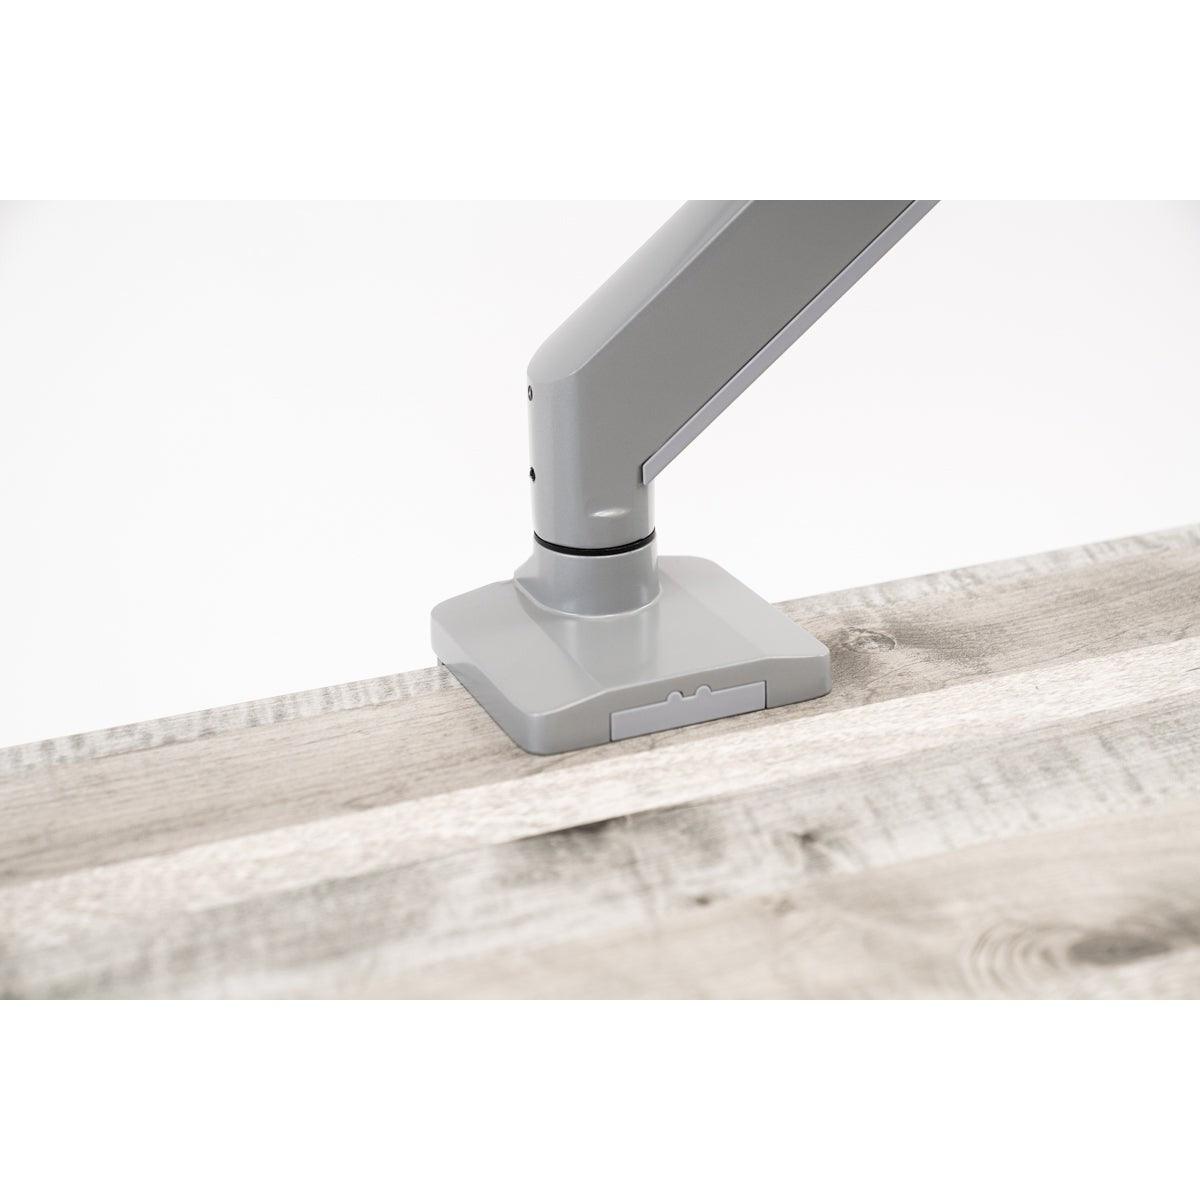 ZipView Unison Dual Monitor Arm with Handle clamp mount